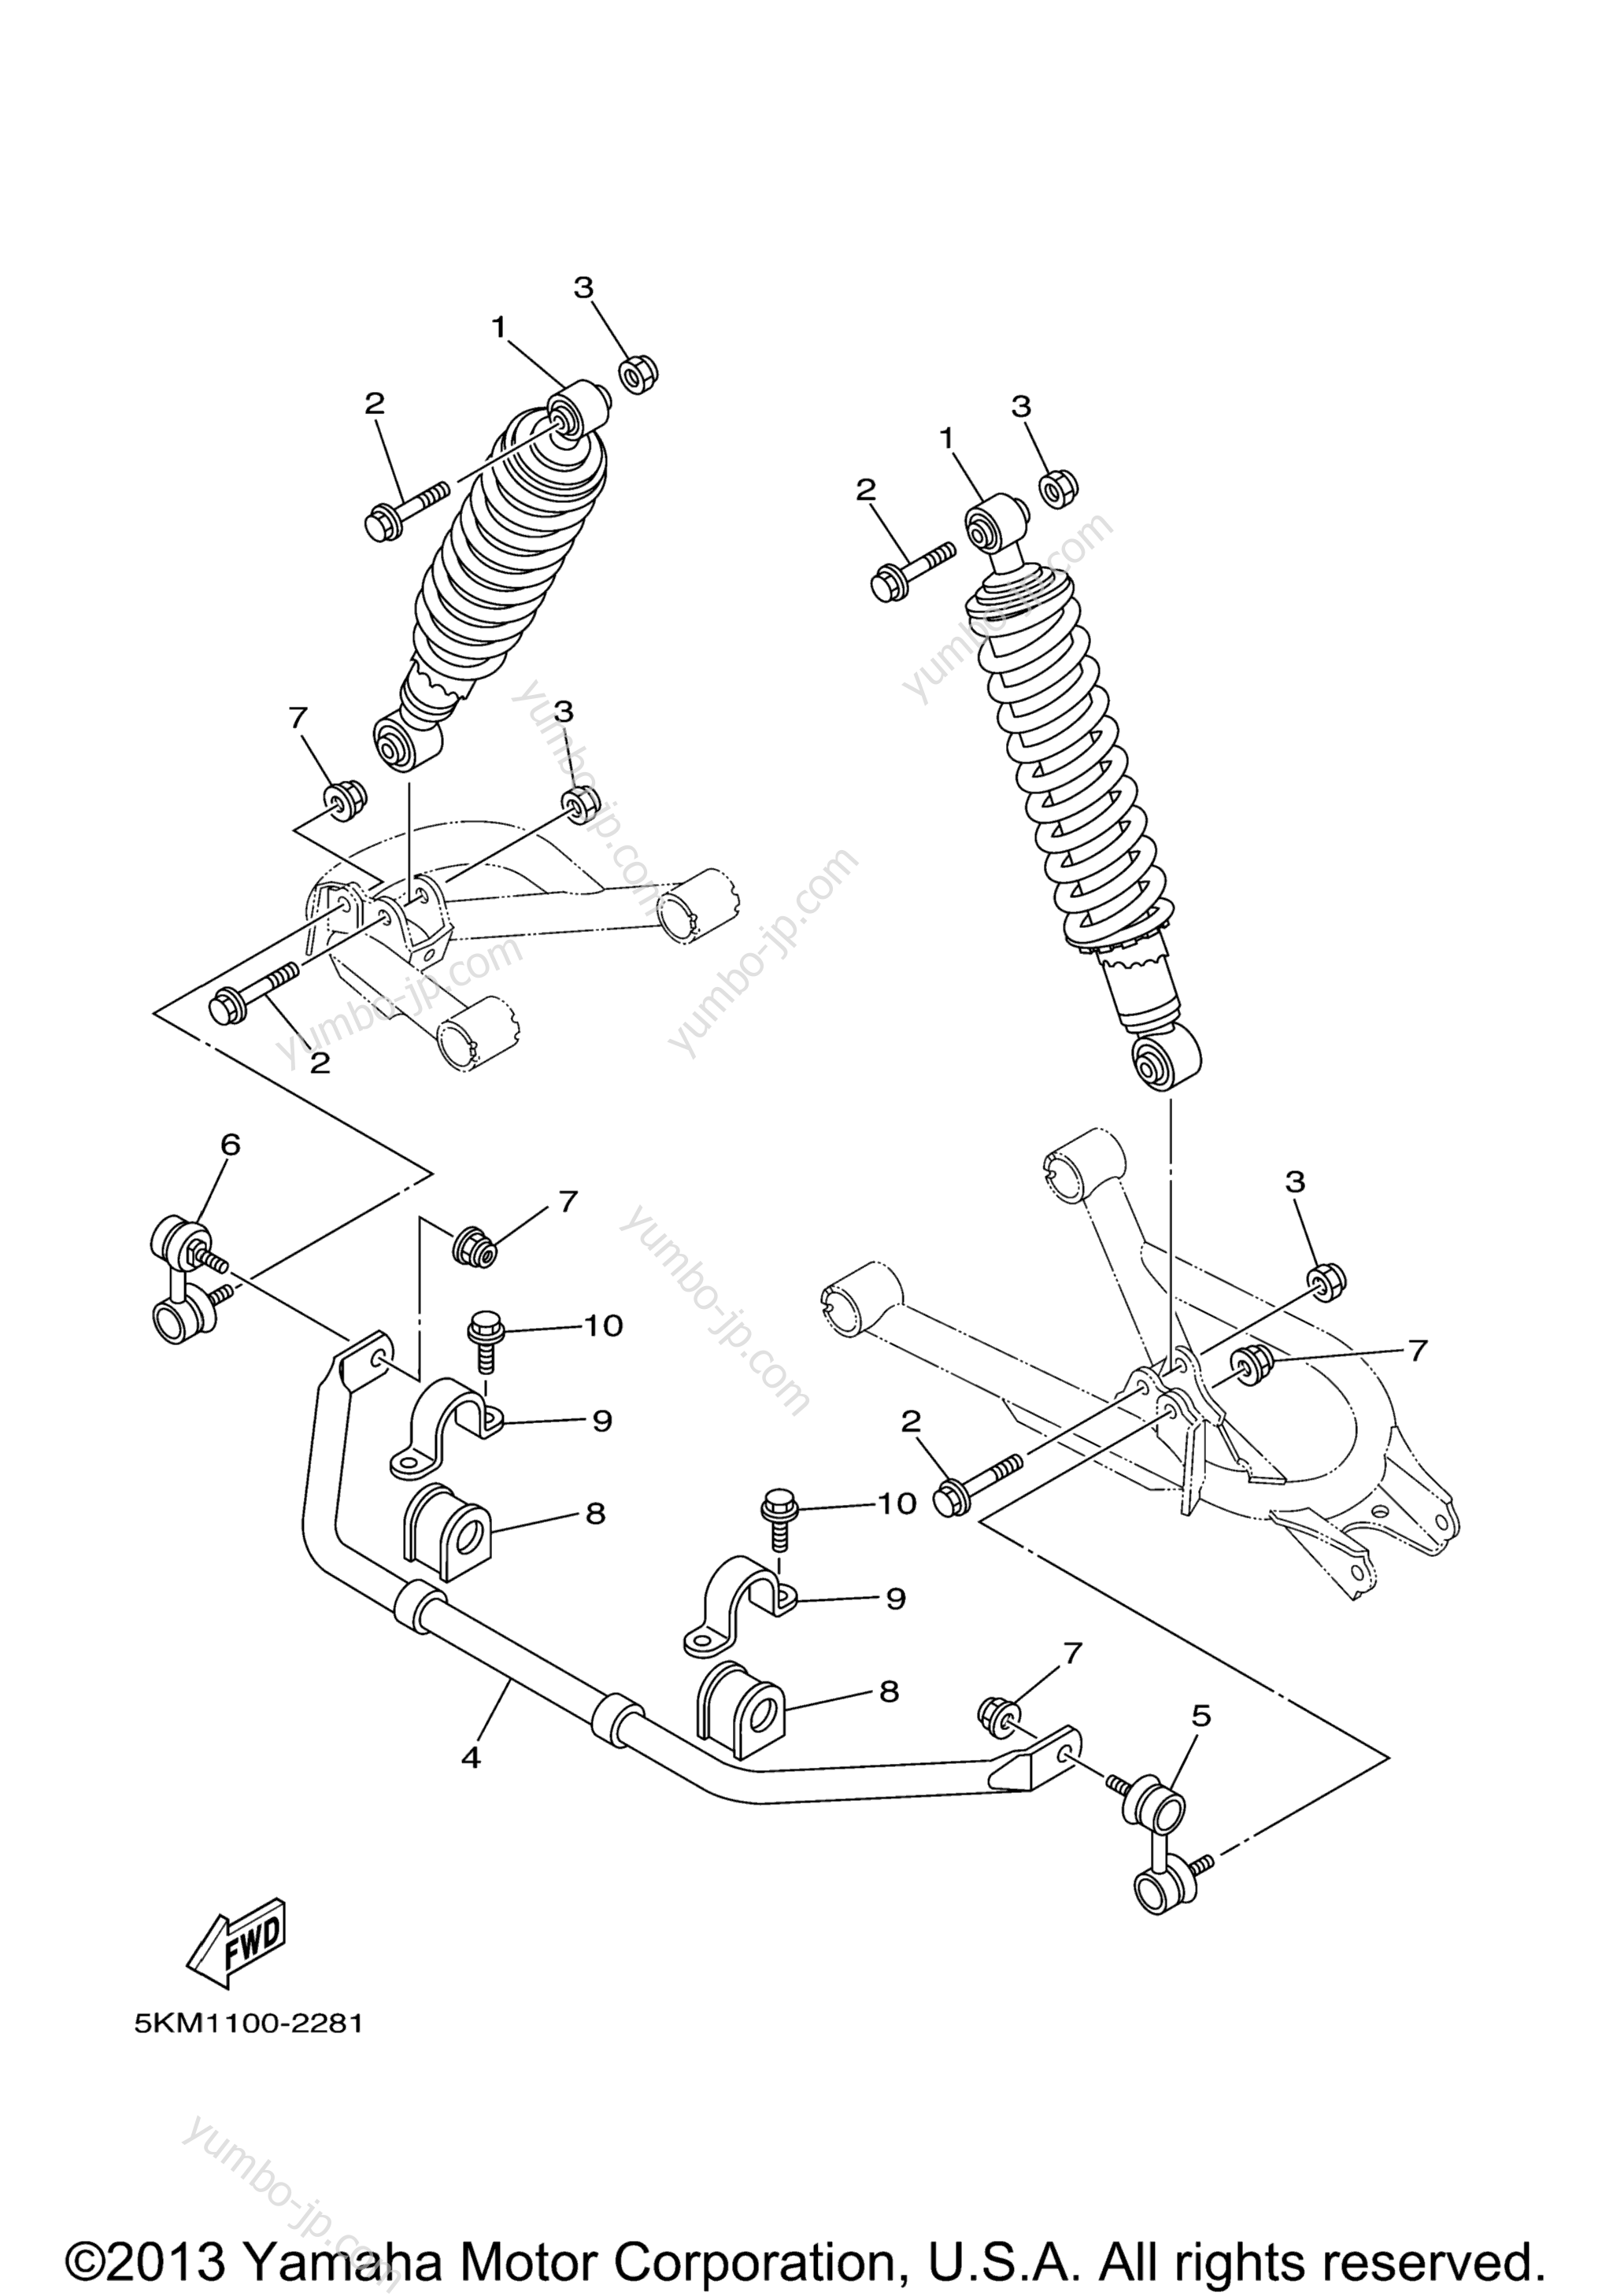 Rear Suspension for ATVs YAMAHA GRIZZLY 660 HUNTER (YFM66FAHT) 2005 year